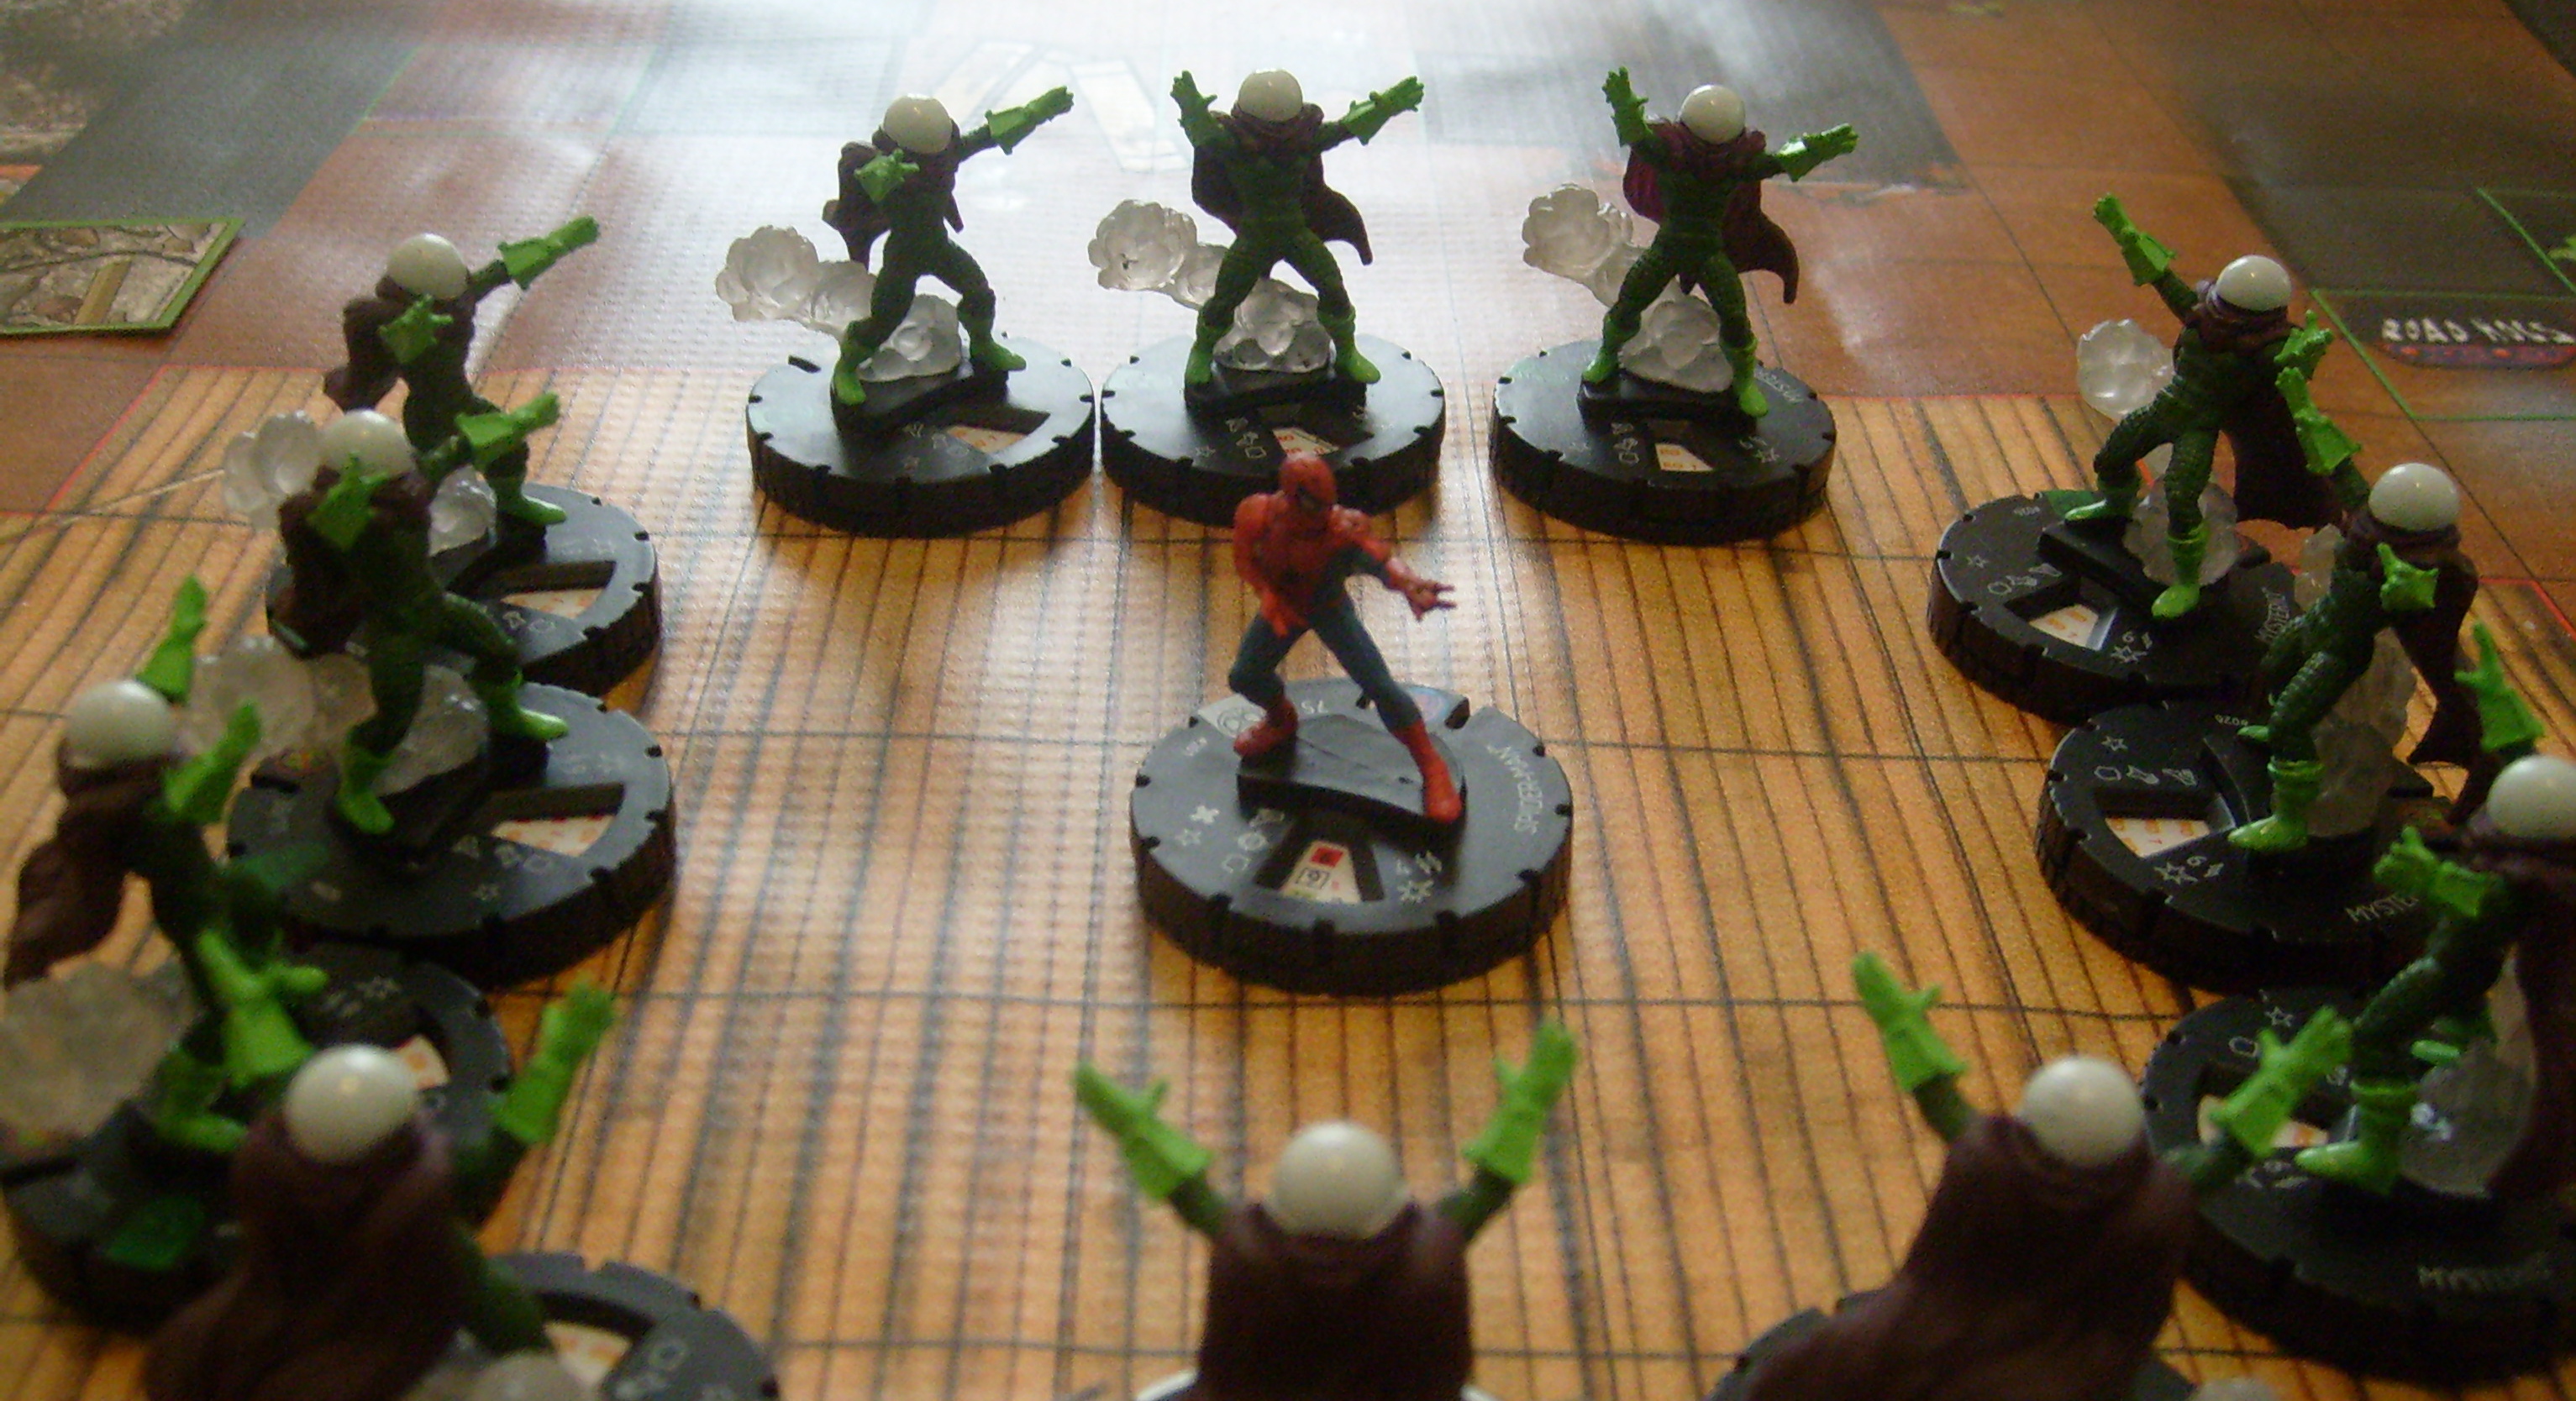 This will never, ever occur in an actual game of HeroClix